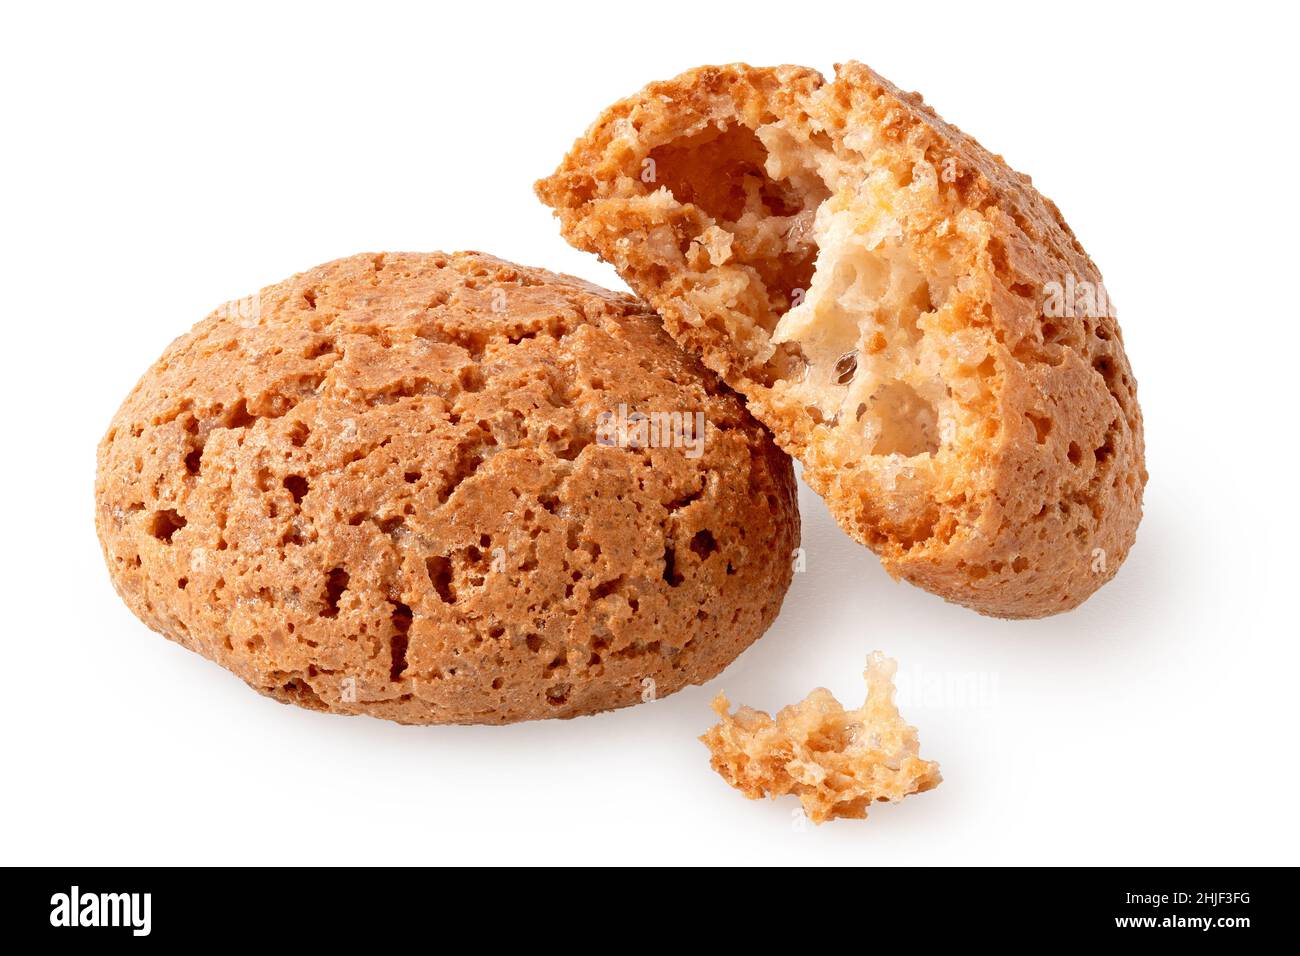 One whole and one broken amaretti biscuits isolated on white. Stock Photo